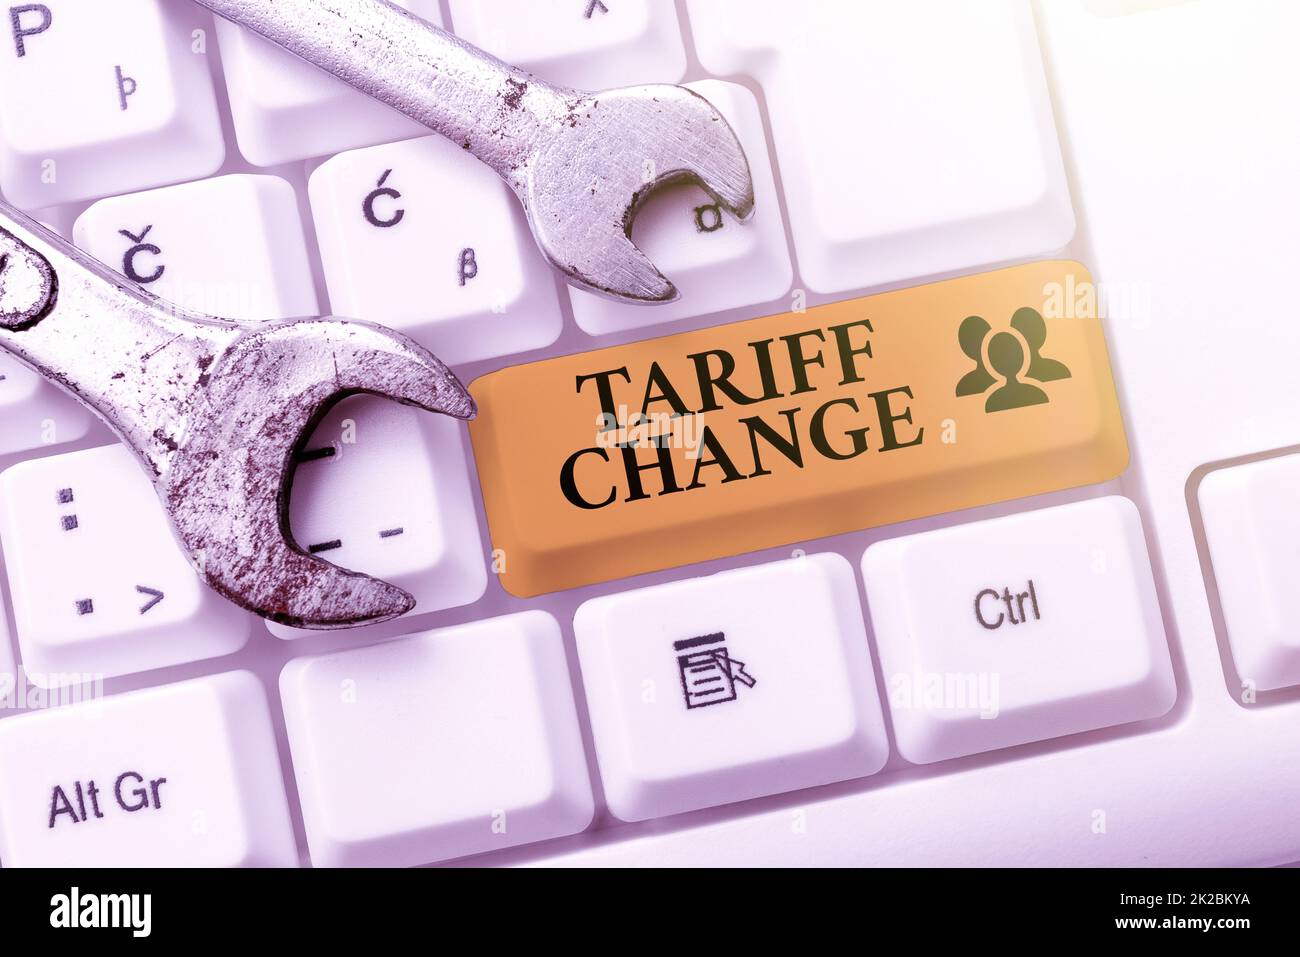 Text Sign Showing Tariff Change Concept Meaning Amendment Of Import 